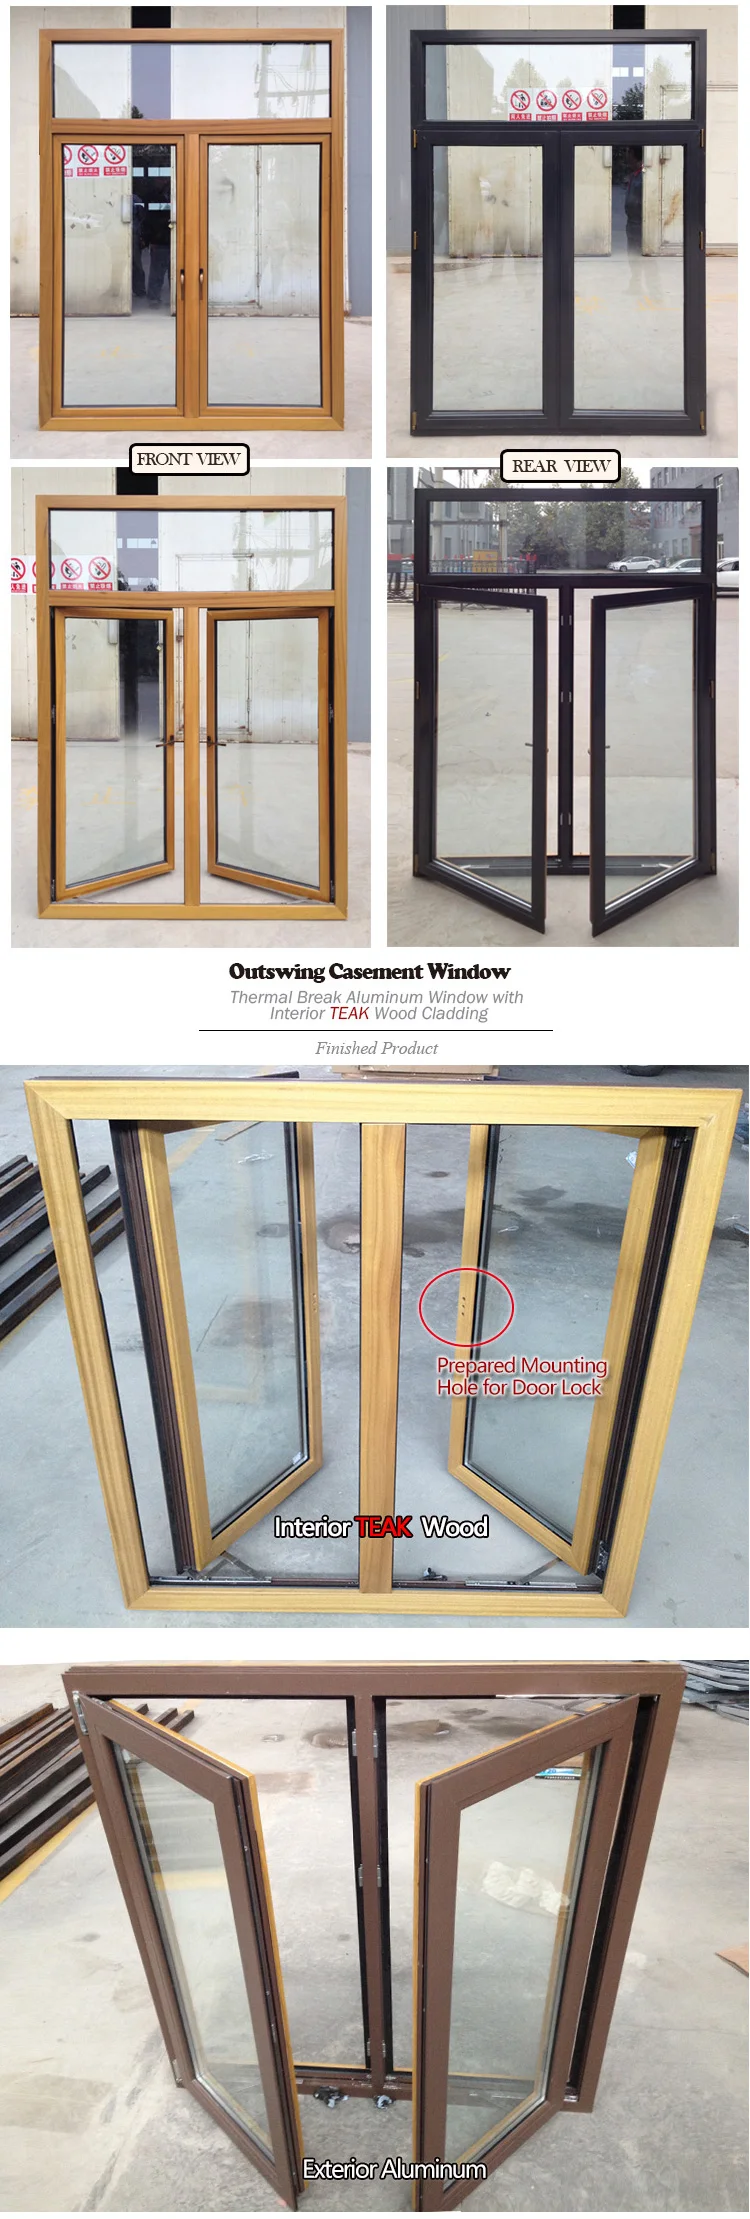 Push out french casement window reviews